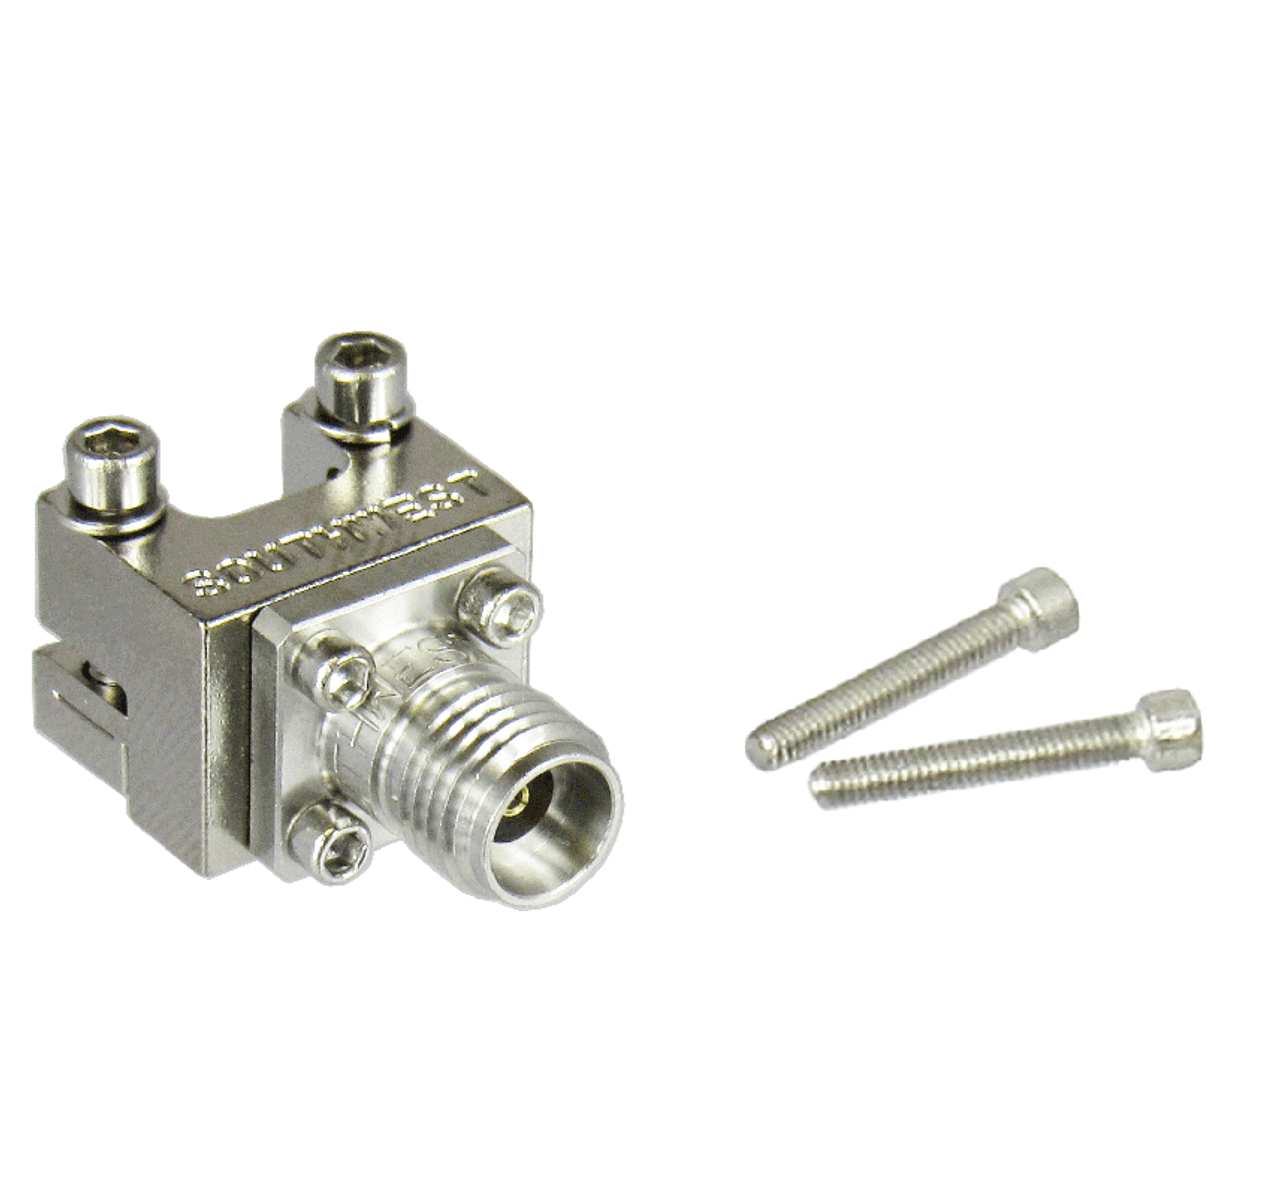 1092-02A-5 2.92 Edge Launch Connector .007 Pin for .048 Dielectric Southwest Microwave Centric RF